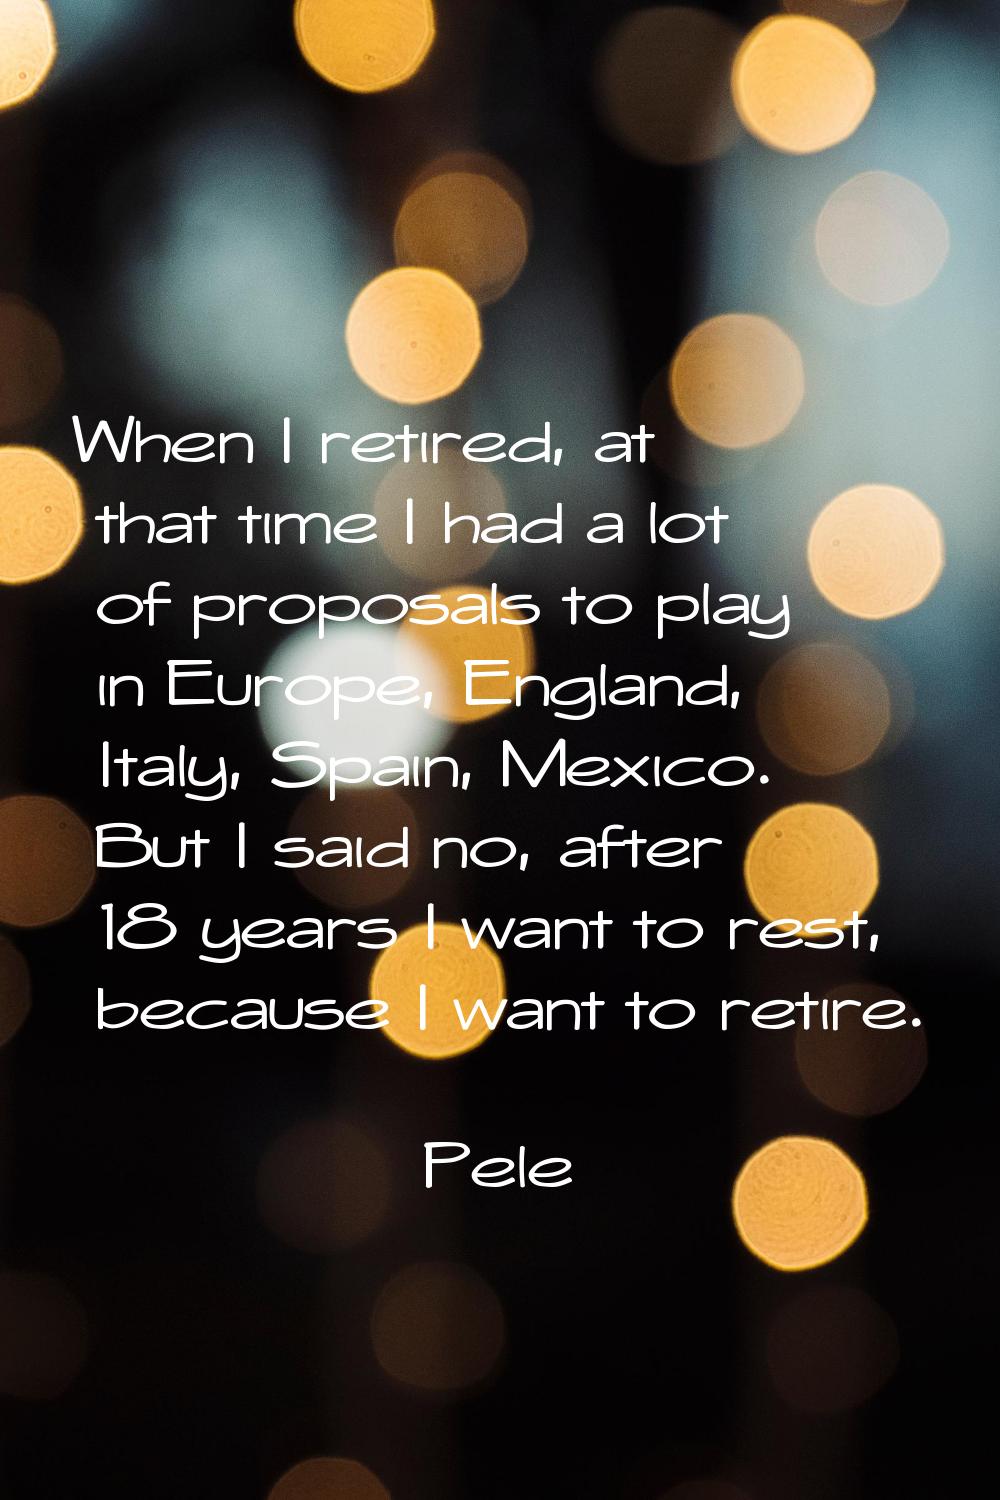 When I retired, at that time I had a lot of proposals to play in Europe, England, Italy, Spain, Mex